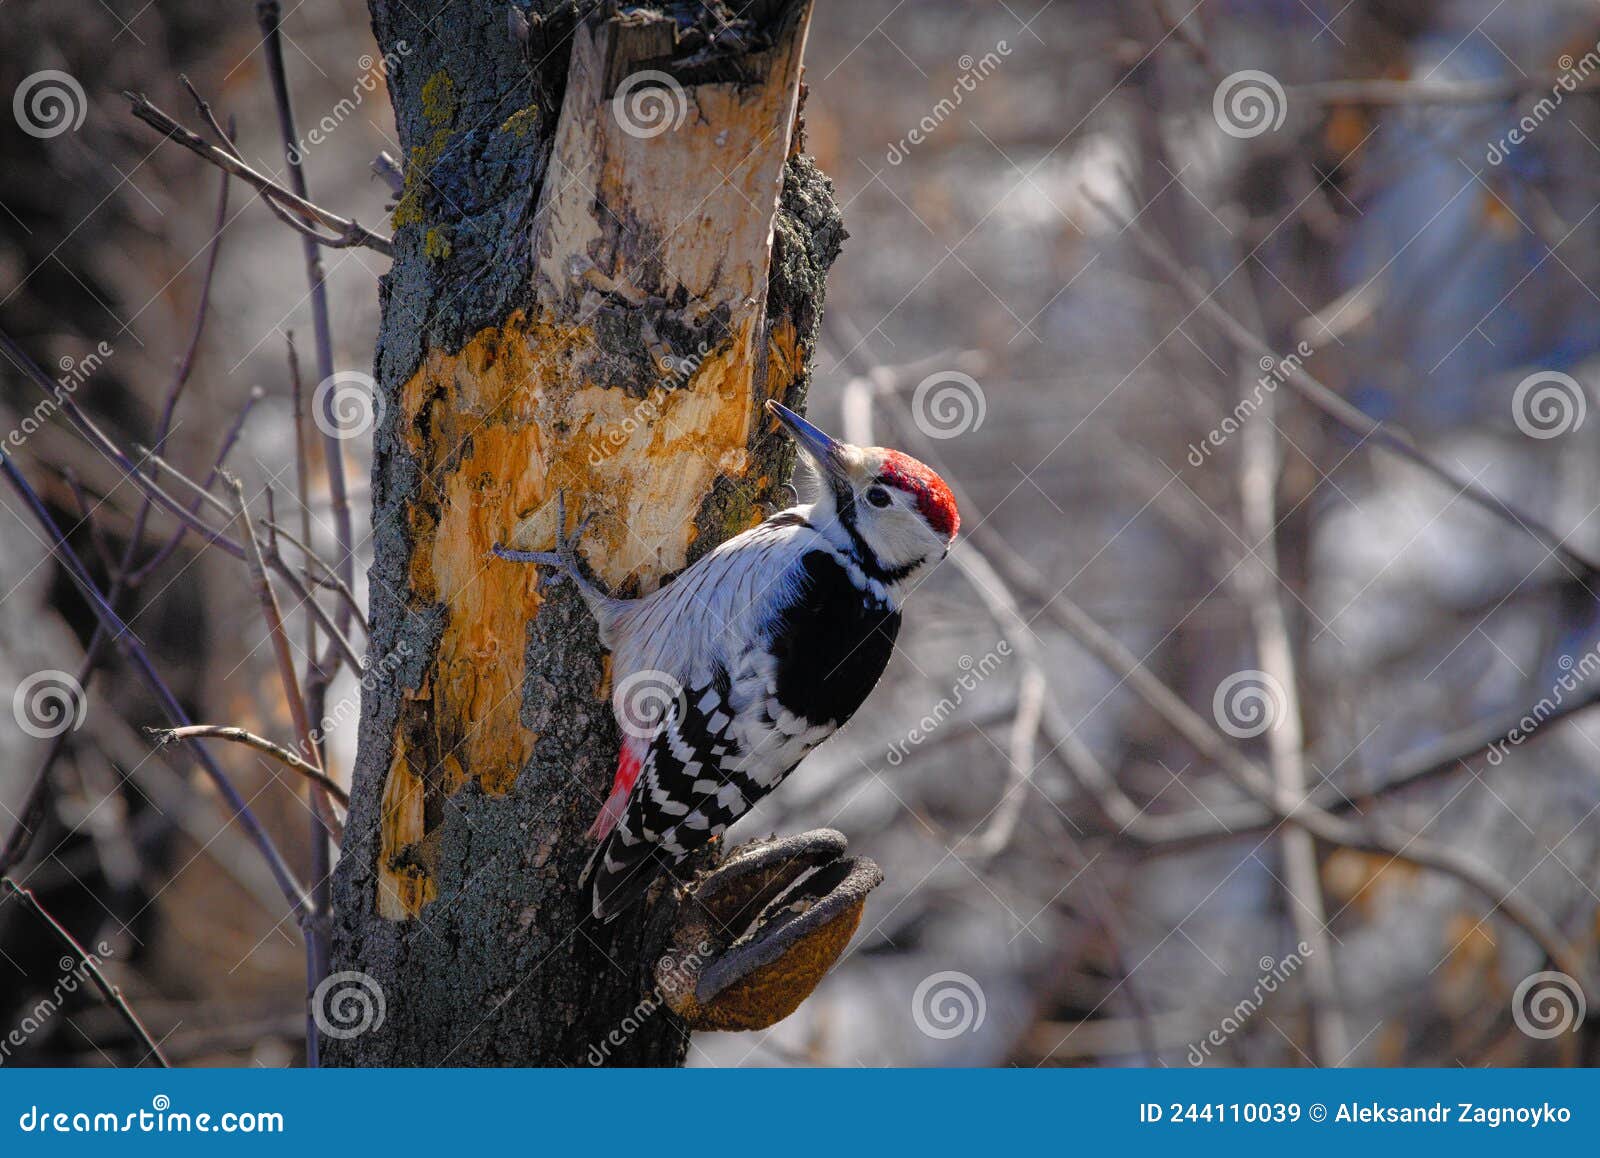 a woodpecker on the trunk of a tree pecked all the bark. a woodpecker with red plumage.